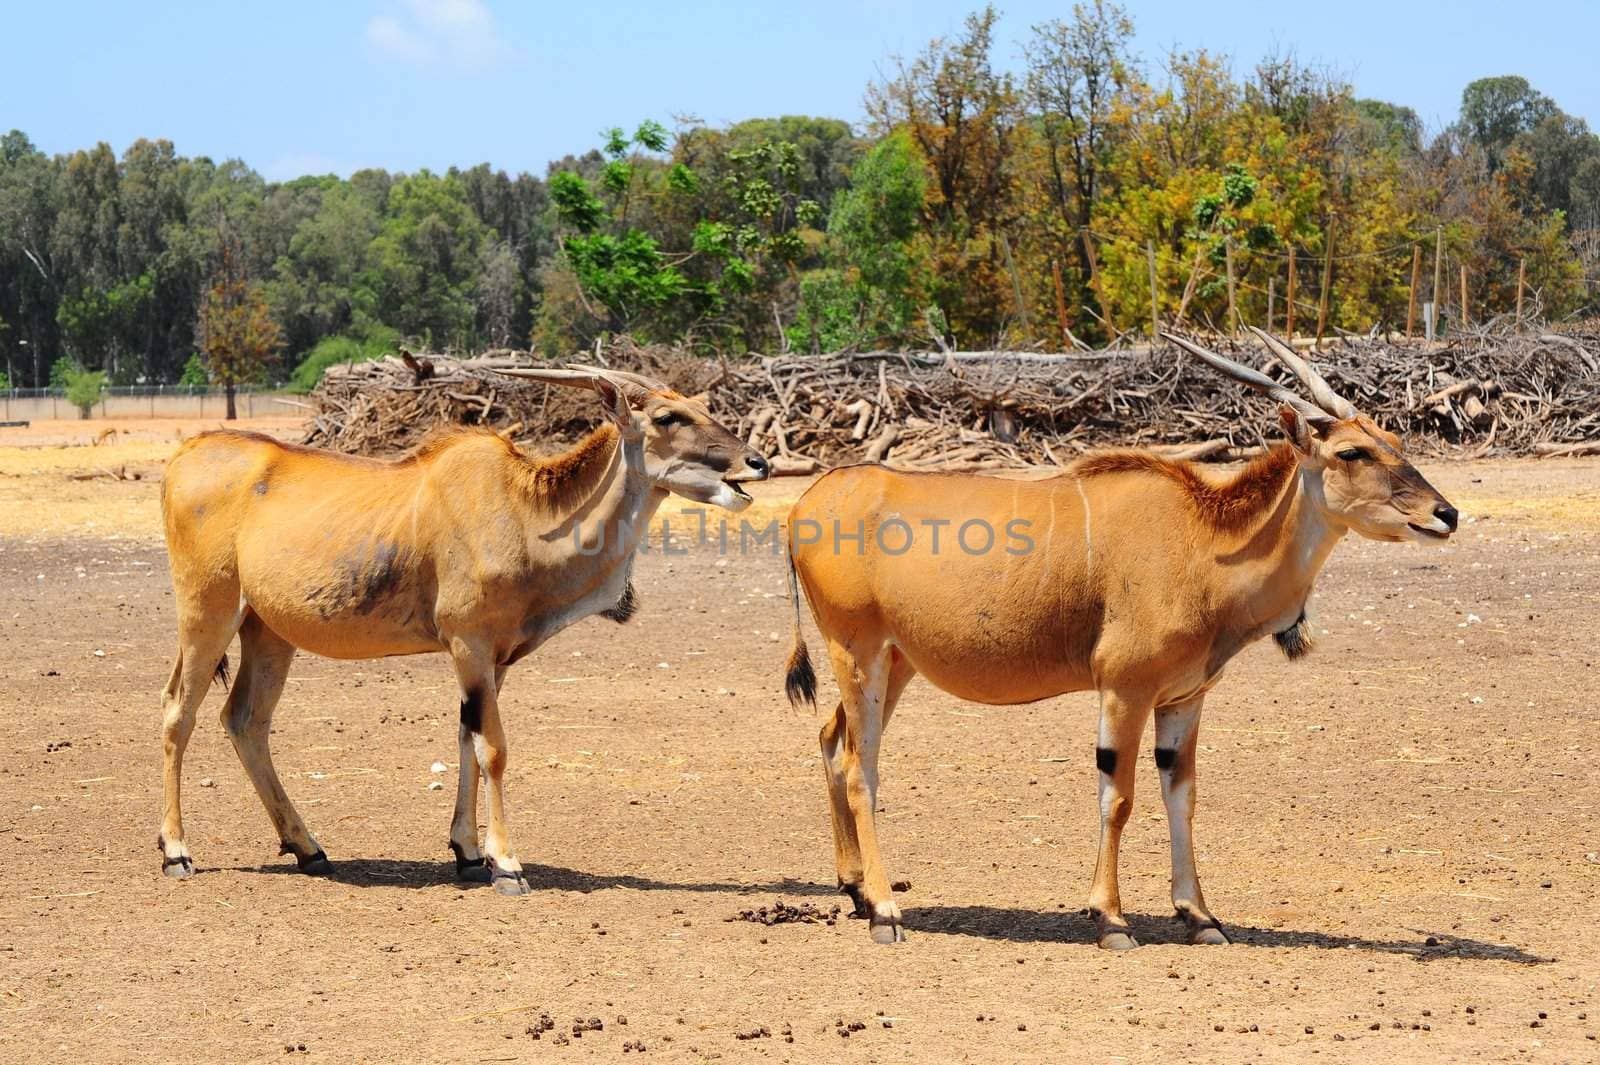 Eland, Taurotragus oryx, Is The Largest Of All Antelopes